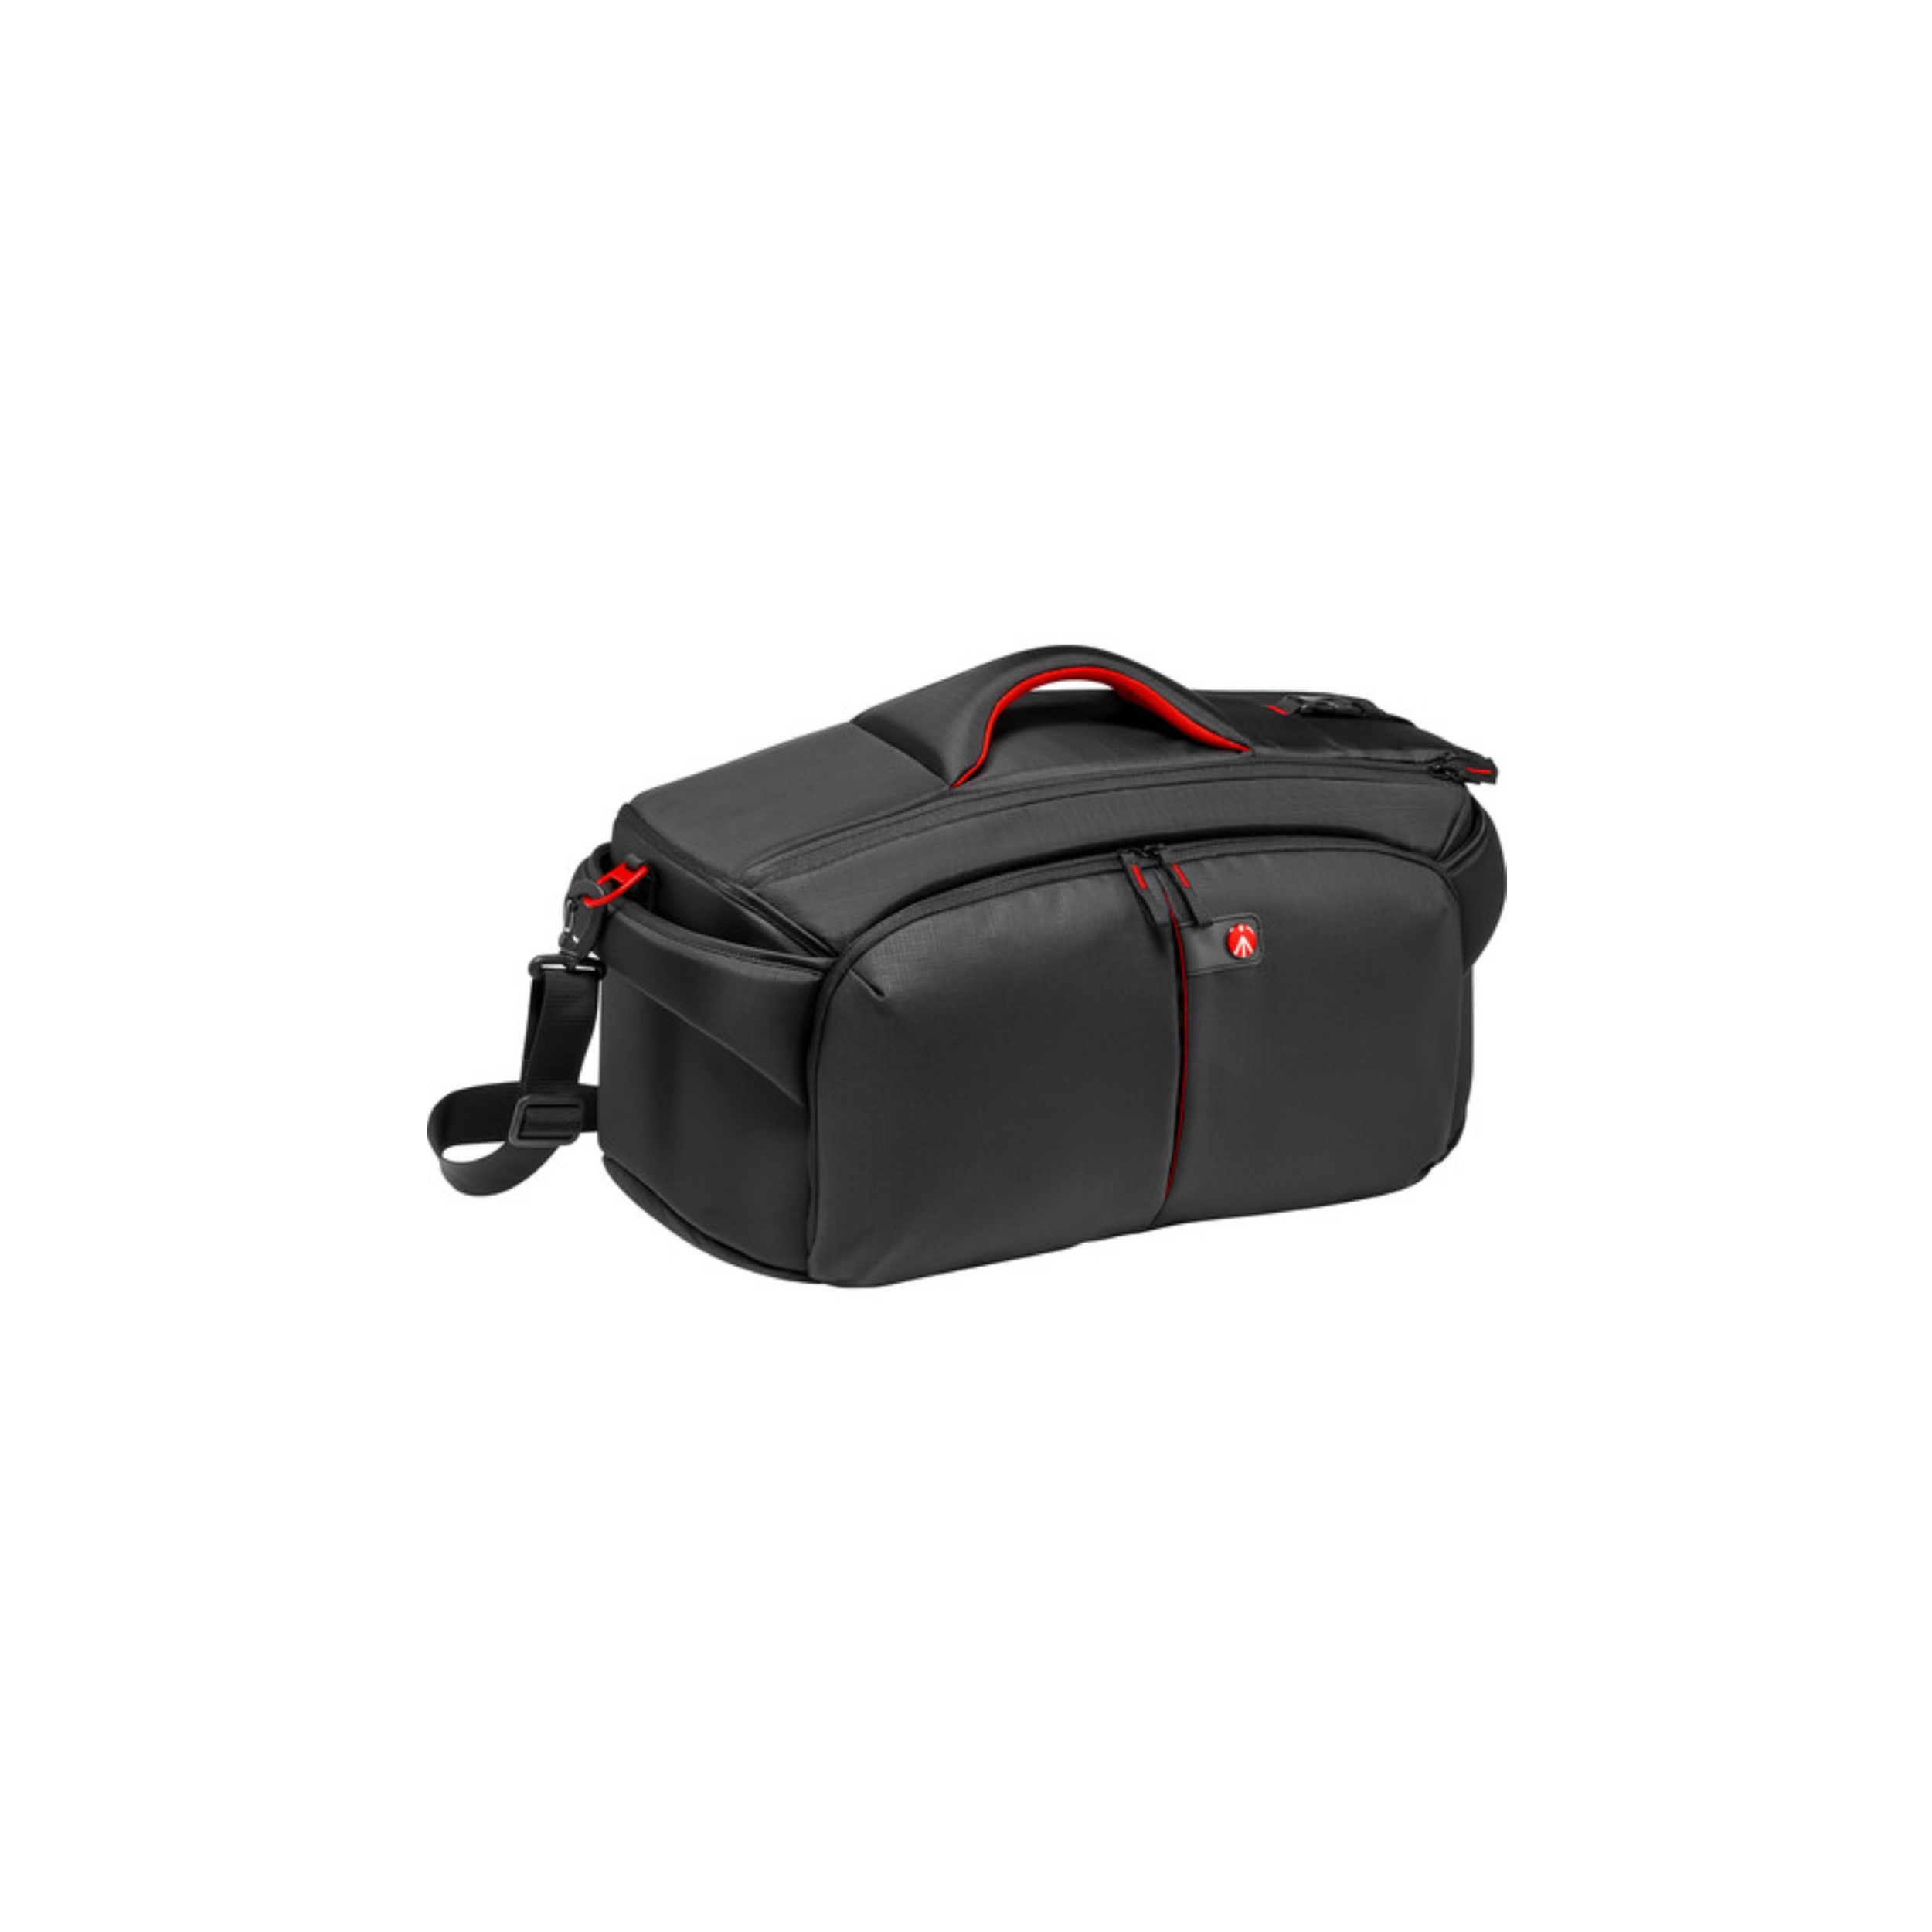 Manfrotto 193N Pro Light Camcorder Case for Sony PMW-X200, HDV & DSLR Cameras